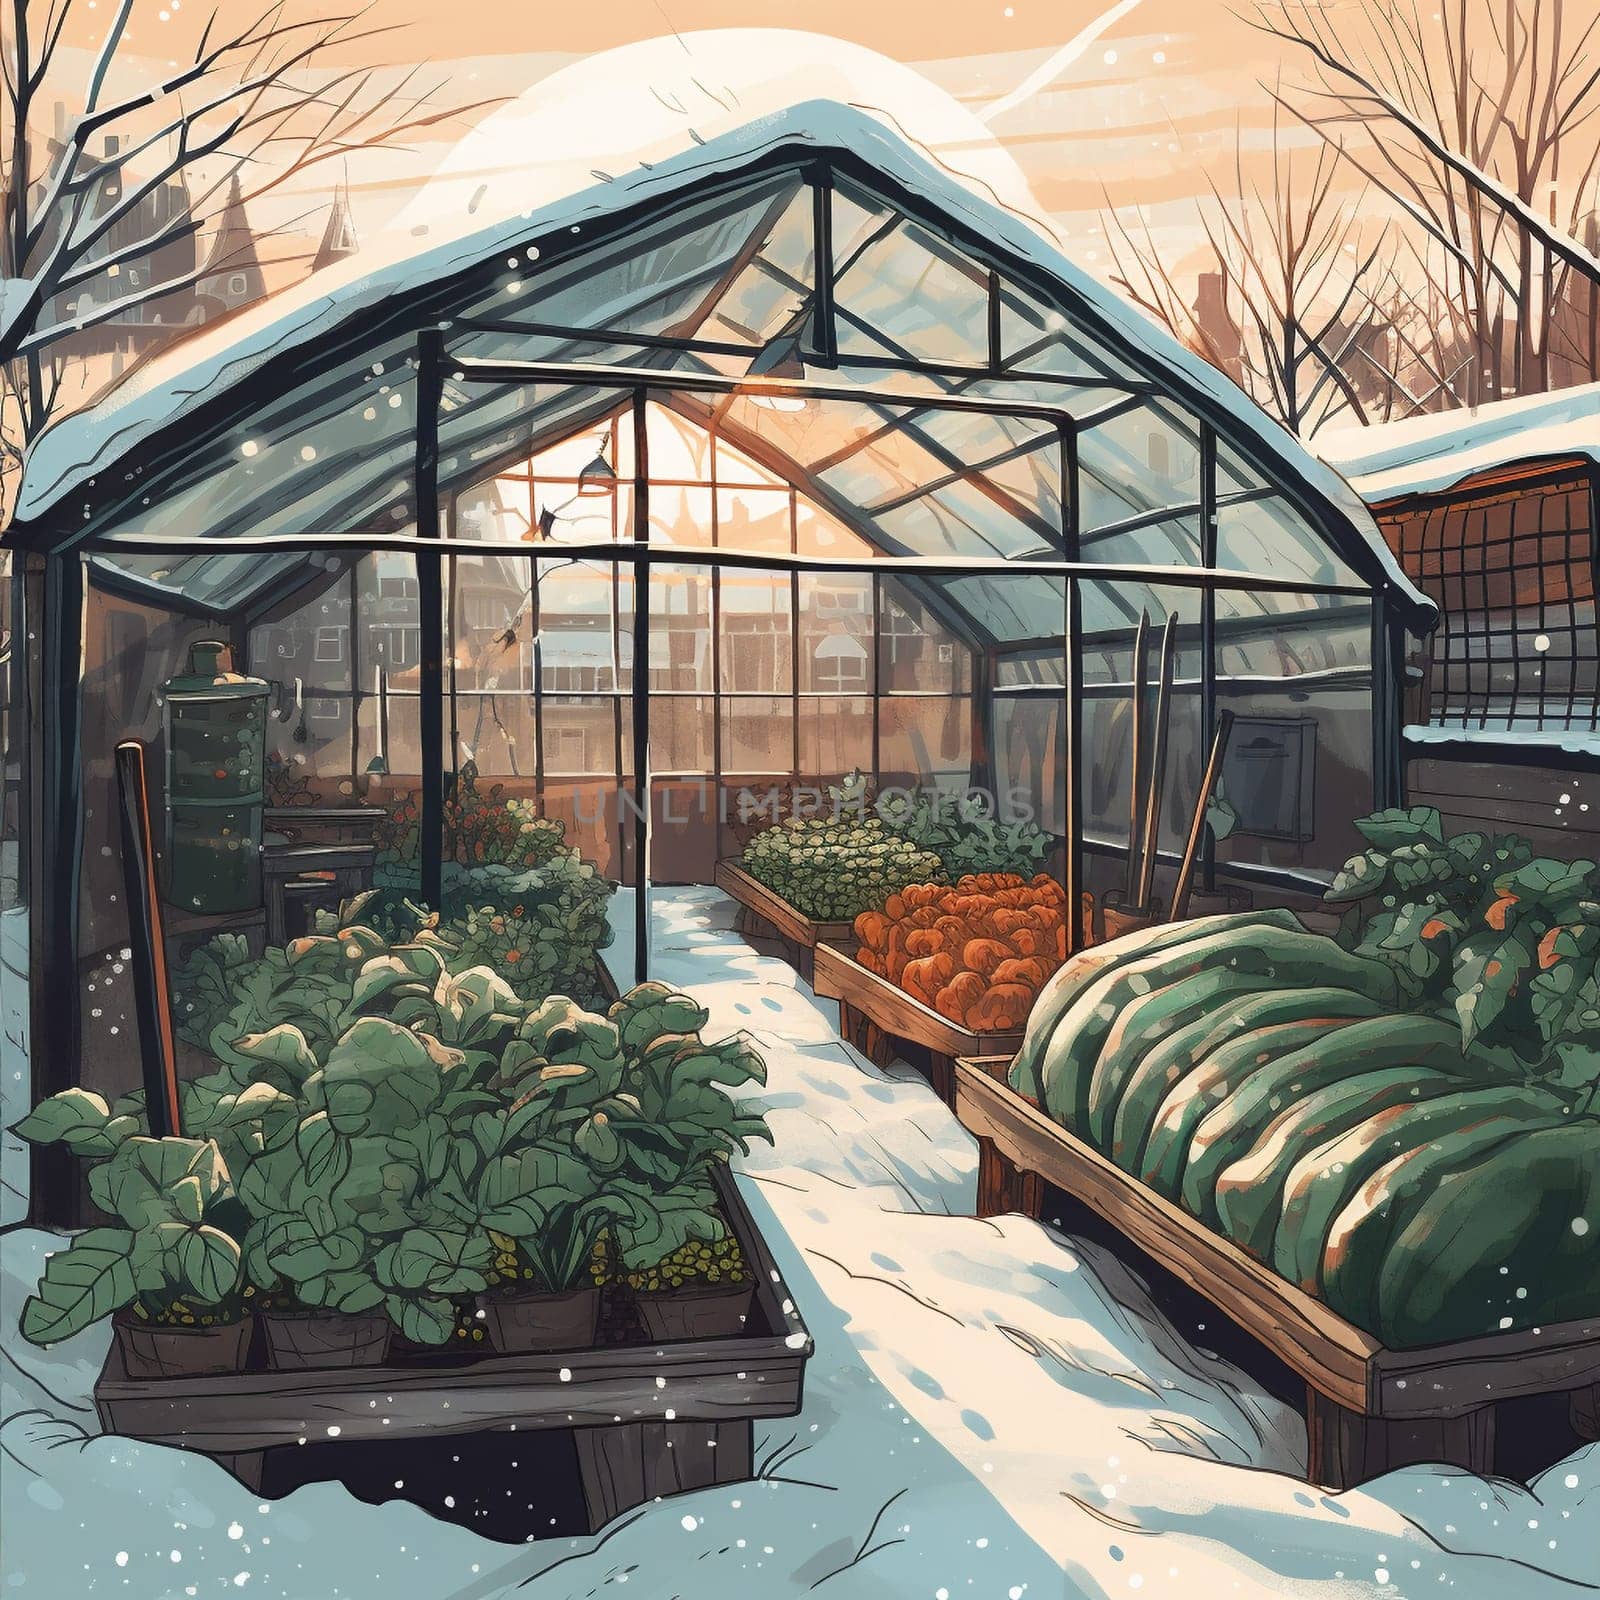 Experience the potential for urban farming to provide fresh produce even in the dead of winter with this image of a greenhouse in the middle of a snowy city. The greenhouse is filled with green plants and thriving crops like tomatoes and peppers, showcasing the resilience and ingenuity of urban farmers. The image inspires hope and a sense of possibility, even in the coldest and darkest of seasons.